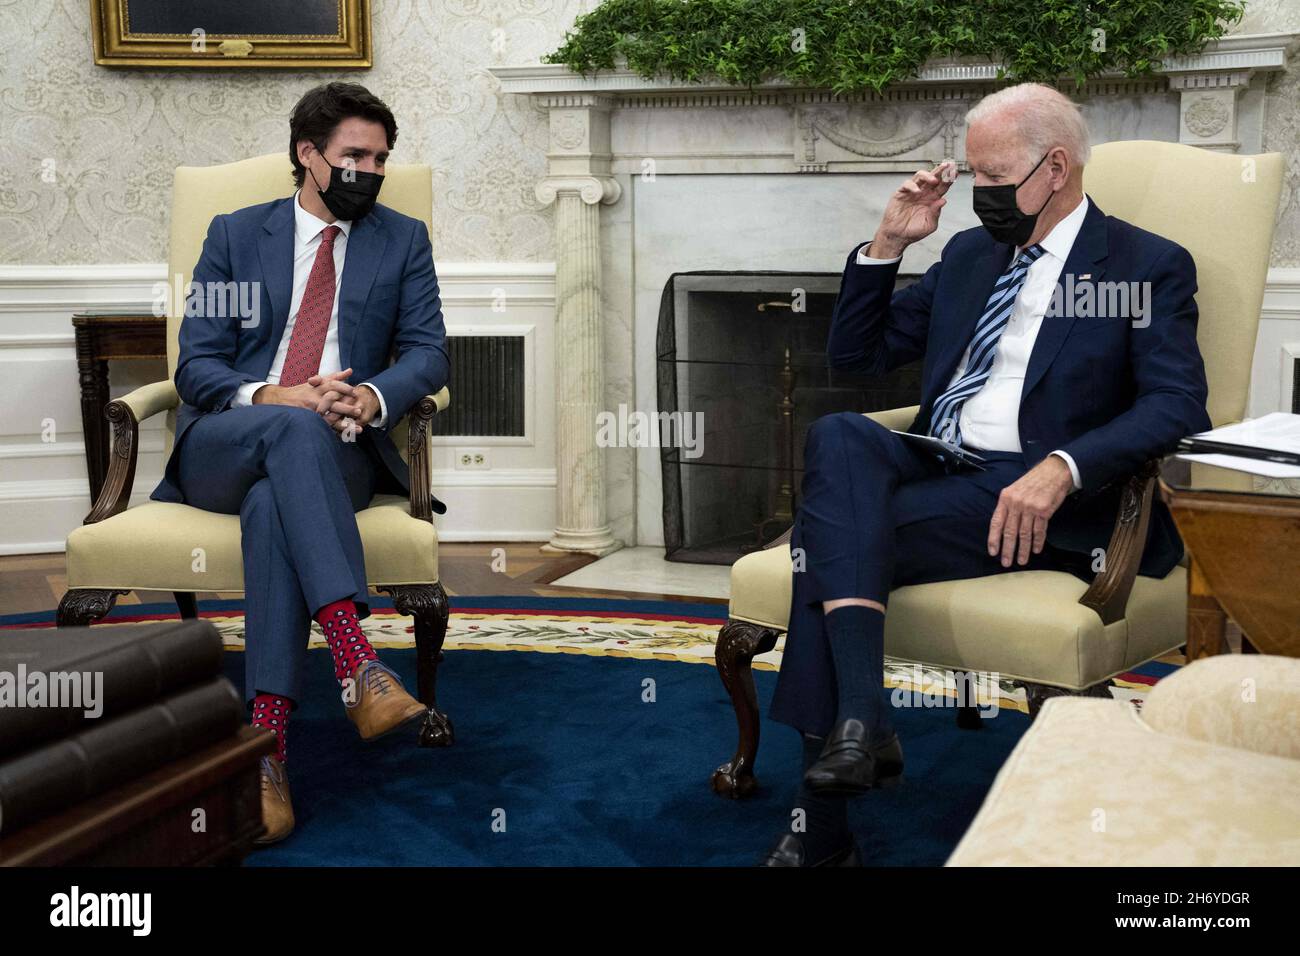 President Joe Biden and Prime Minister of Canada Justin Trudeau during a meeting in the Oval Office, Thursday, Nov. 18, 2021. (POOL Photo by Doug Mills/The New York Times) Stock Photo